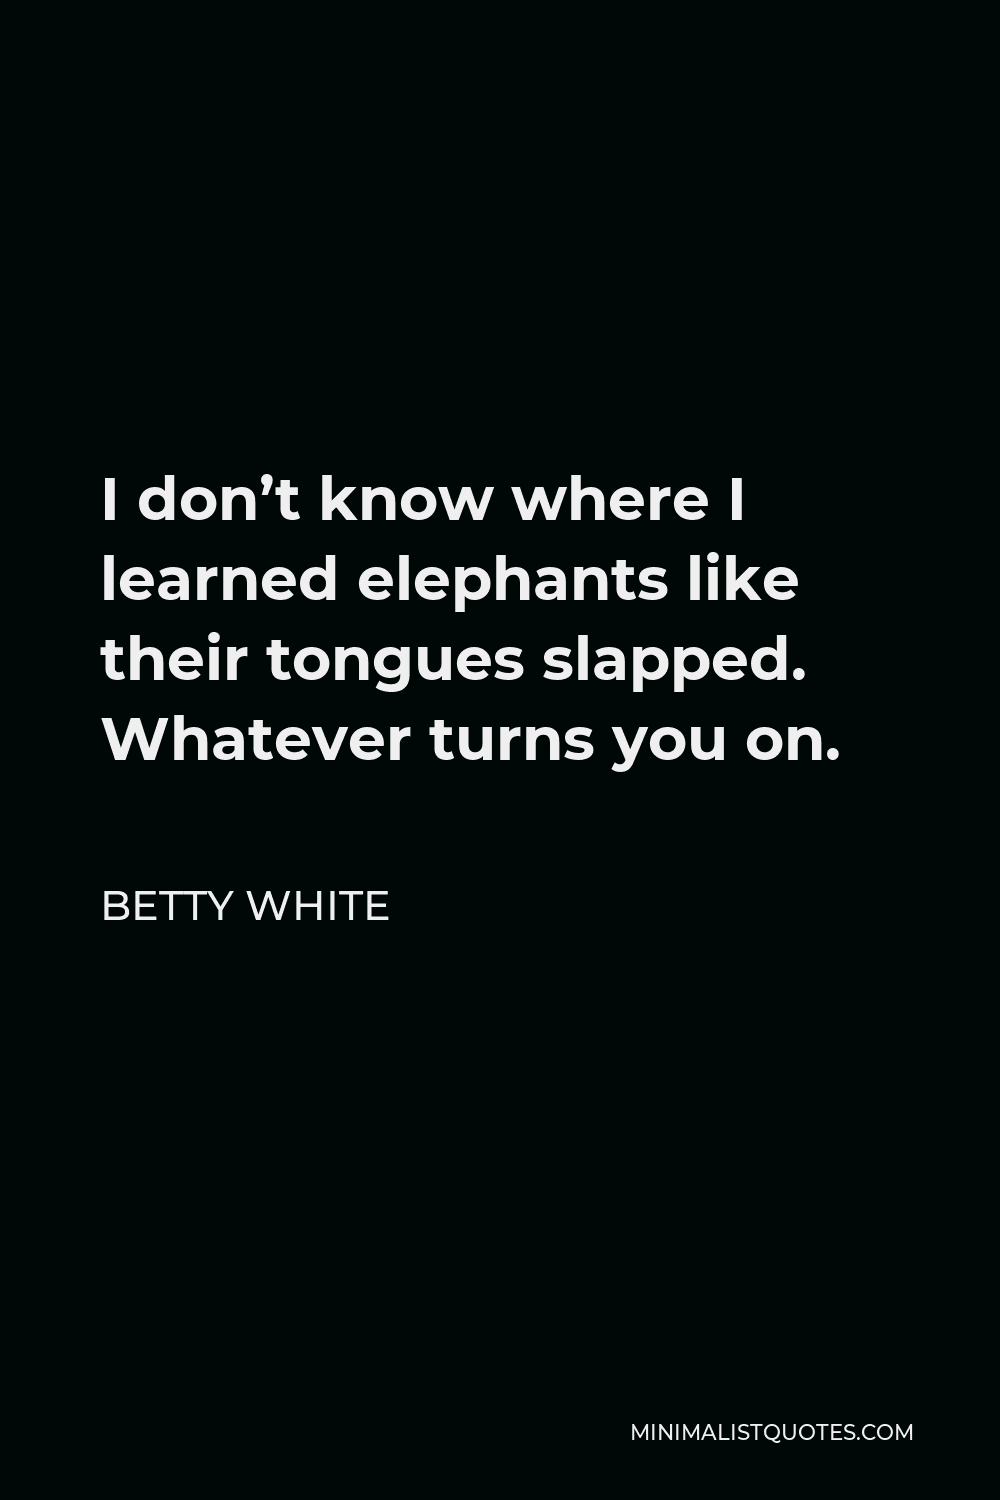 Betty White Quote - I don’t know where I learned elephants like their tongues slapped. Whatever turns you on.